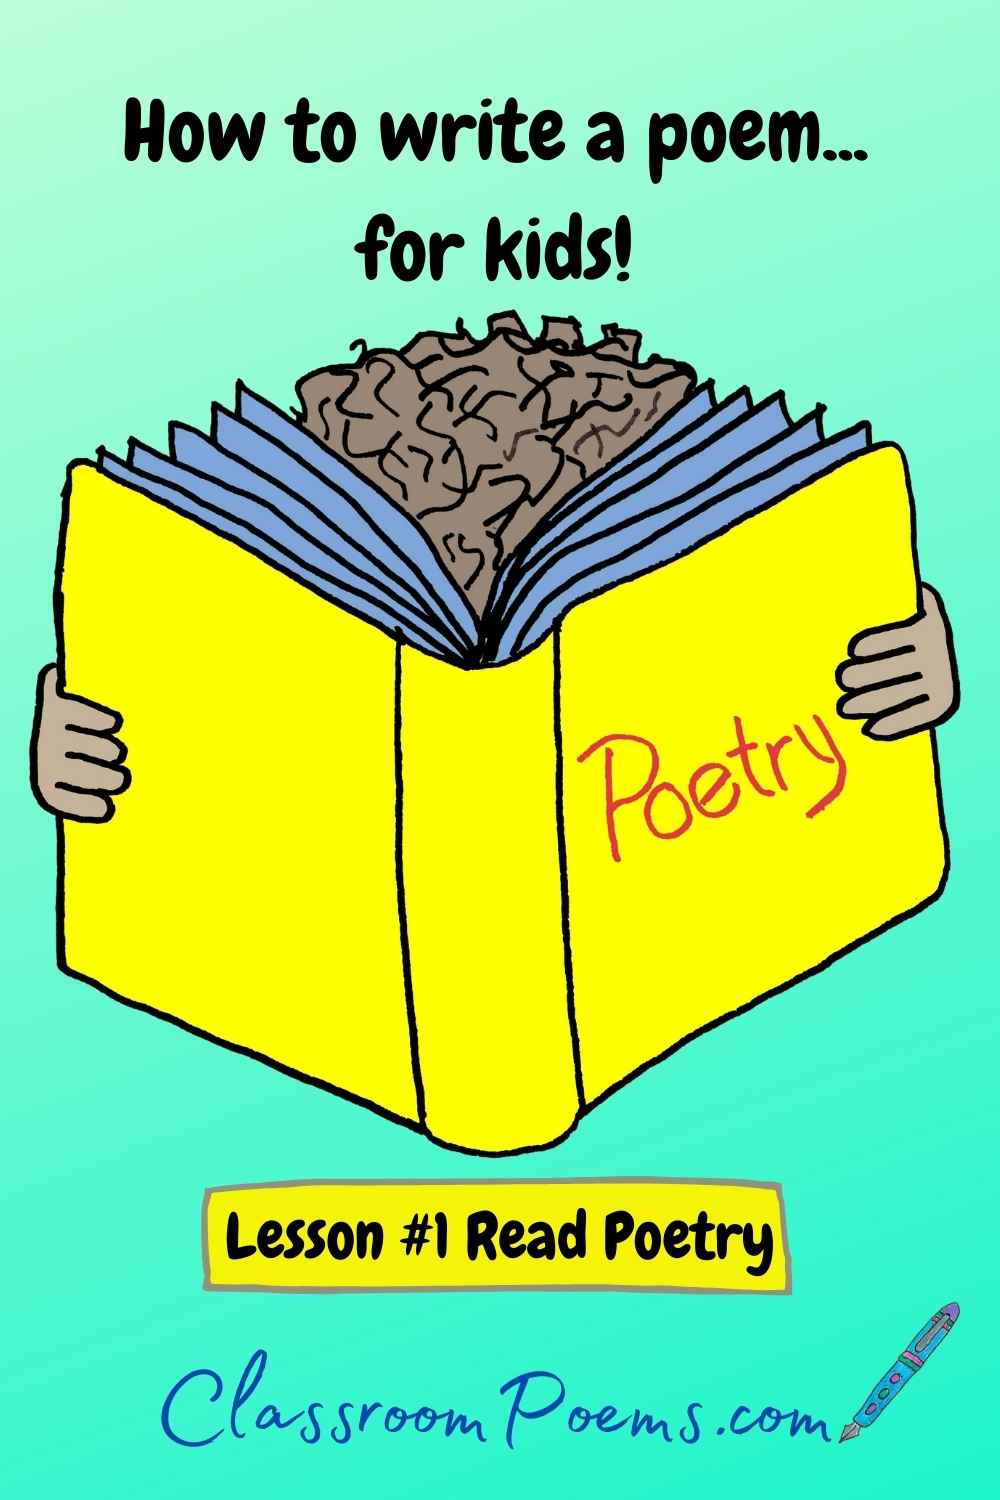 How to teach poetry to kids. Read poems on ClassroomPoems.com.